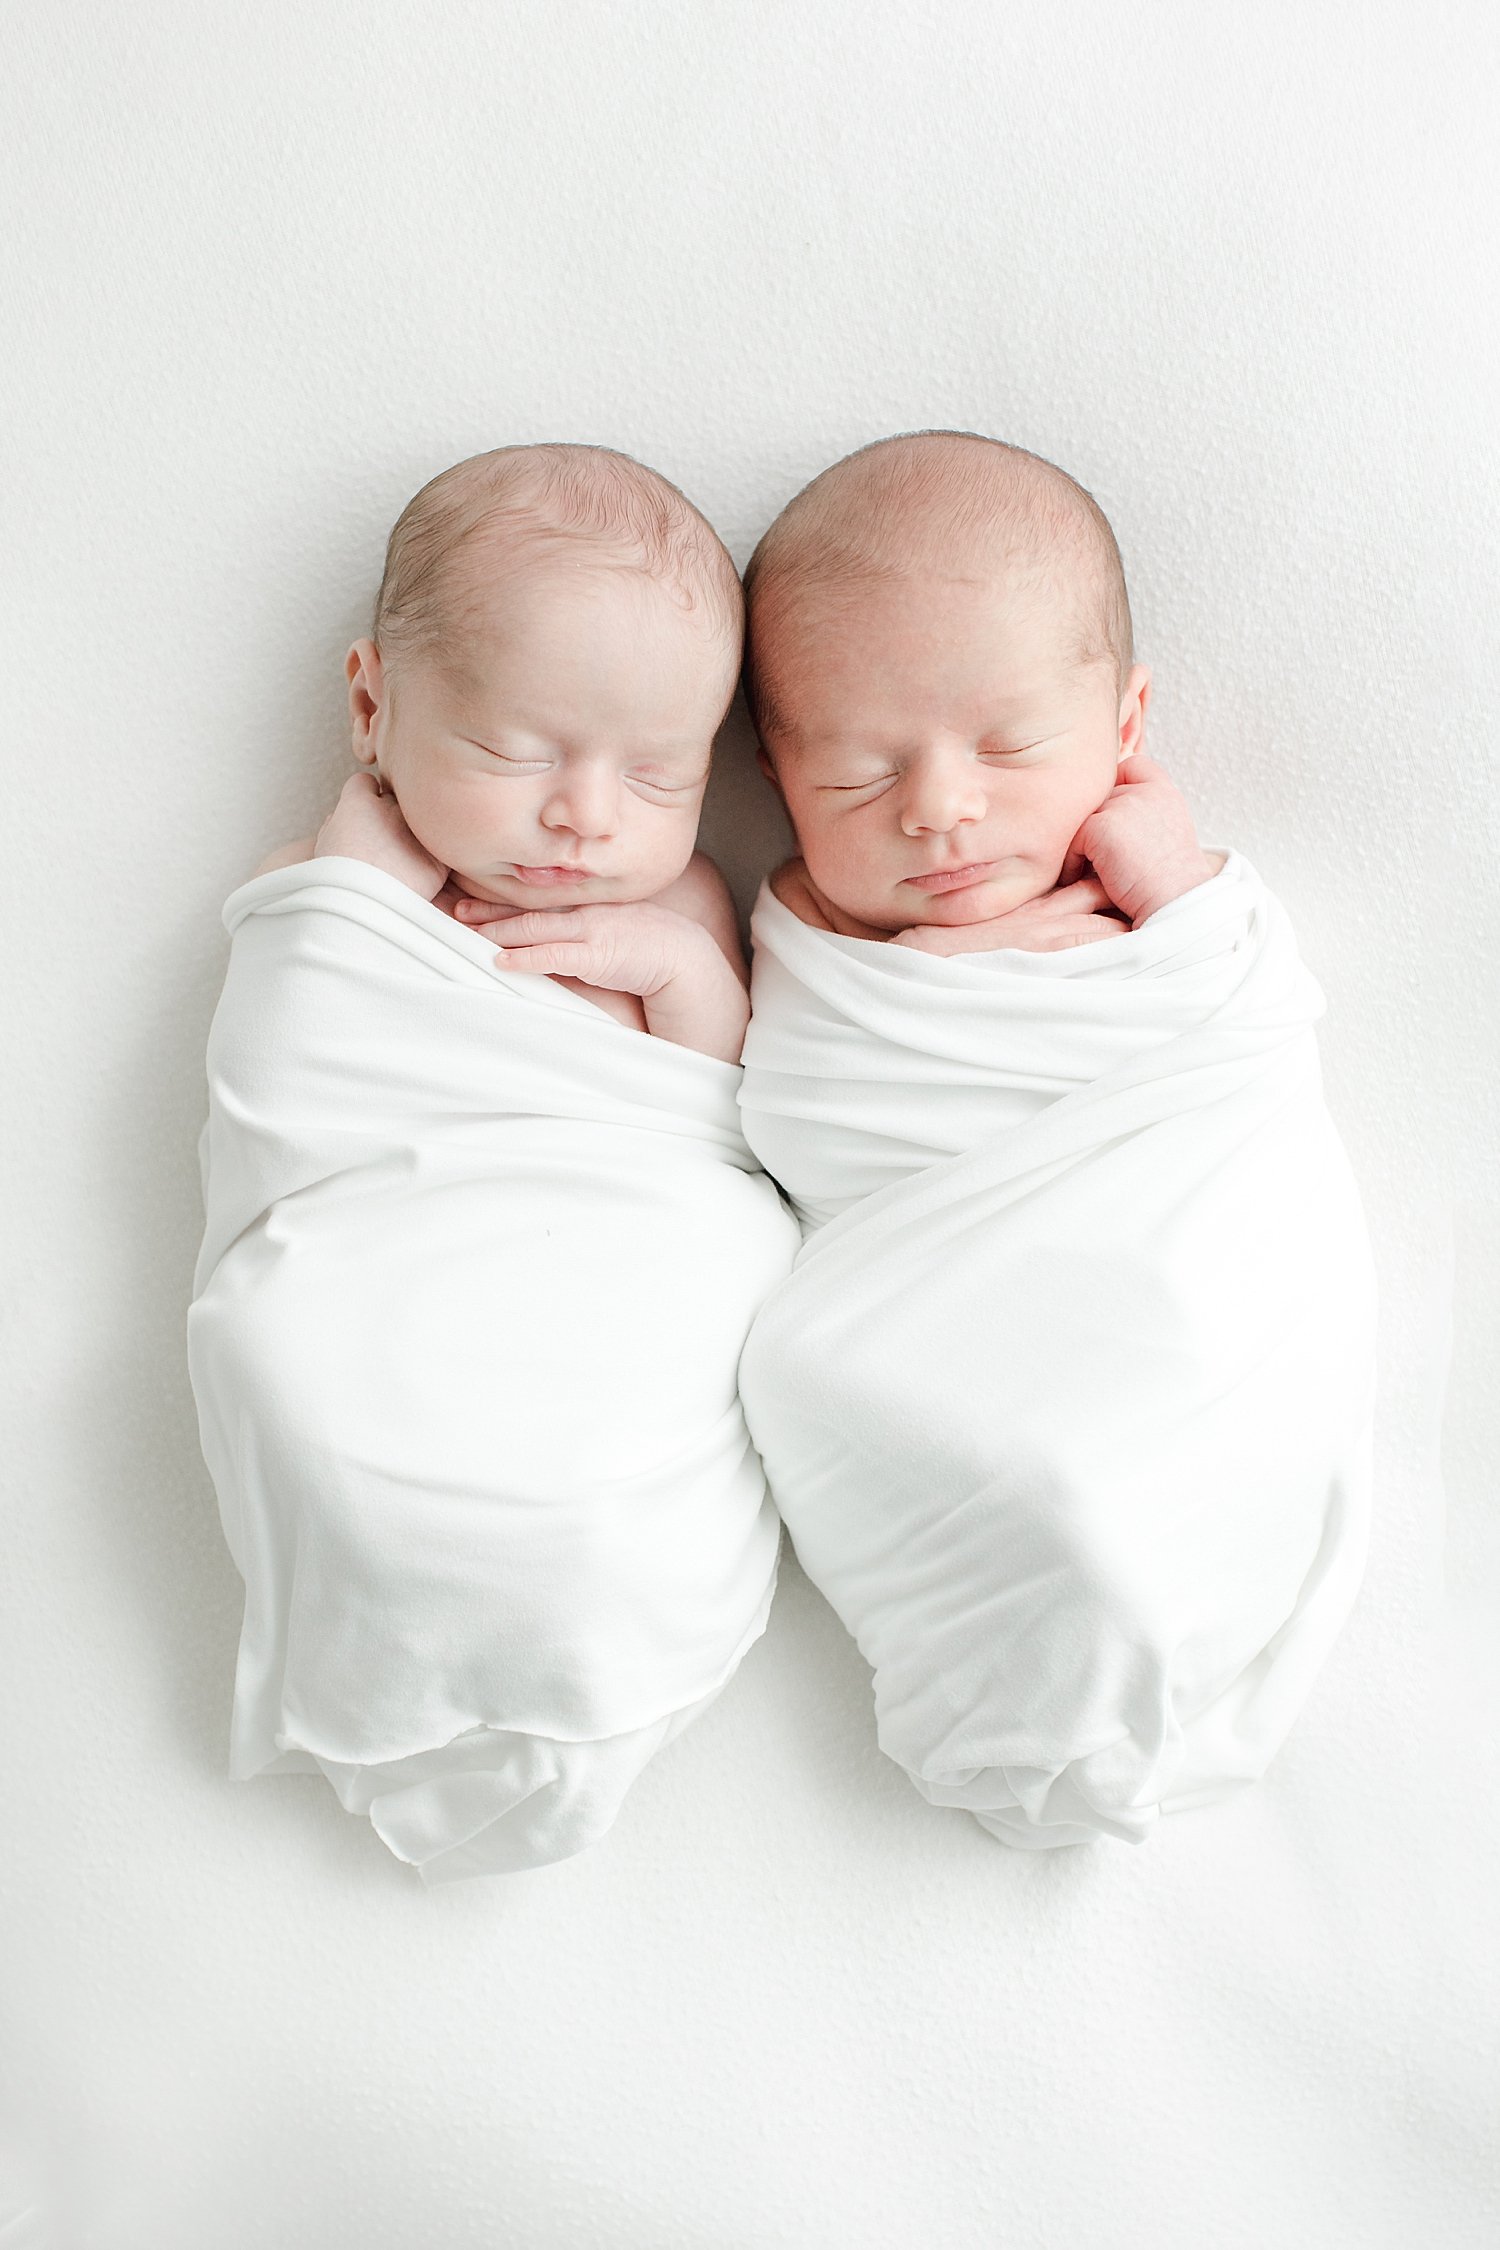 Twin boys swaddled for newborn photos with Kristin Wood Photography.